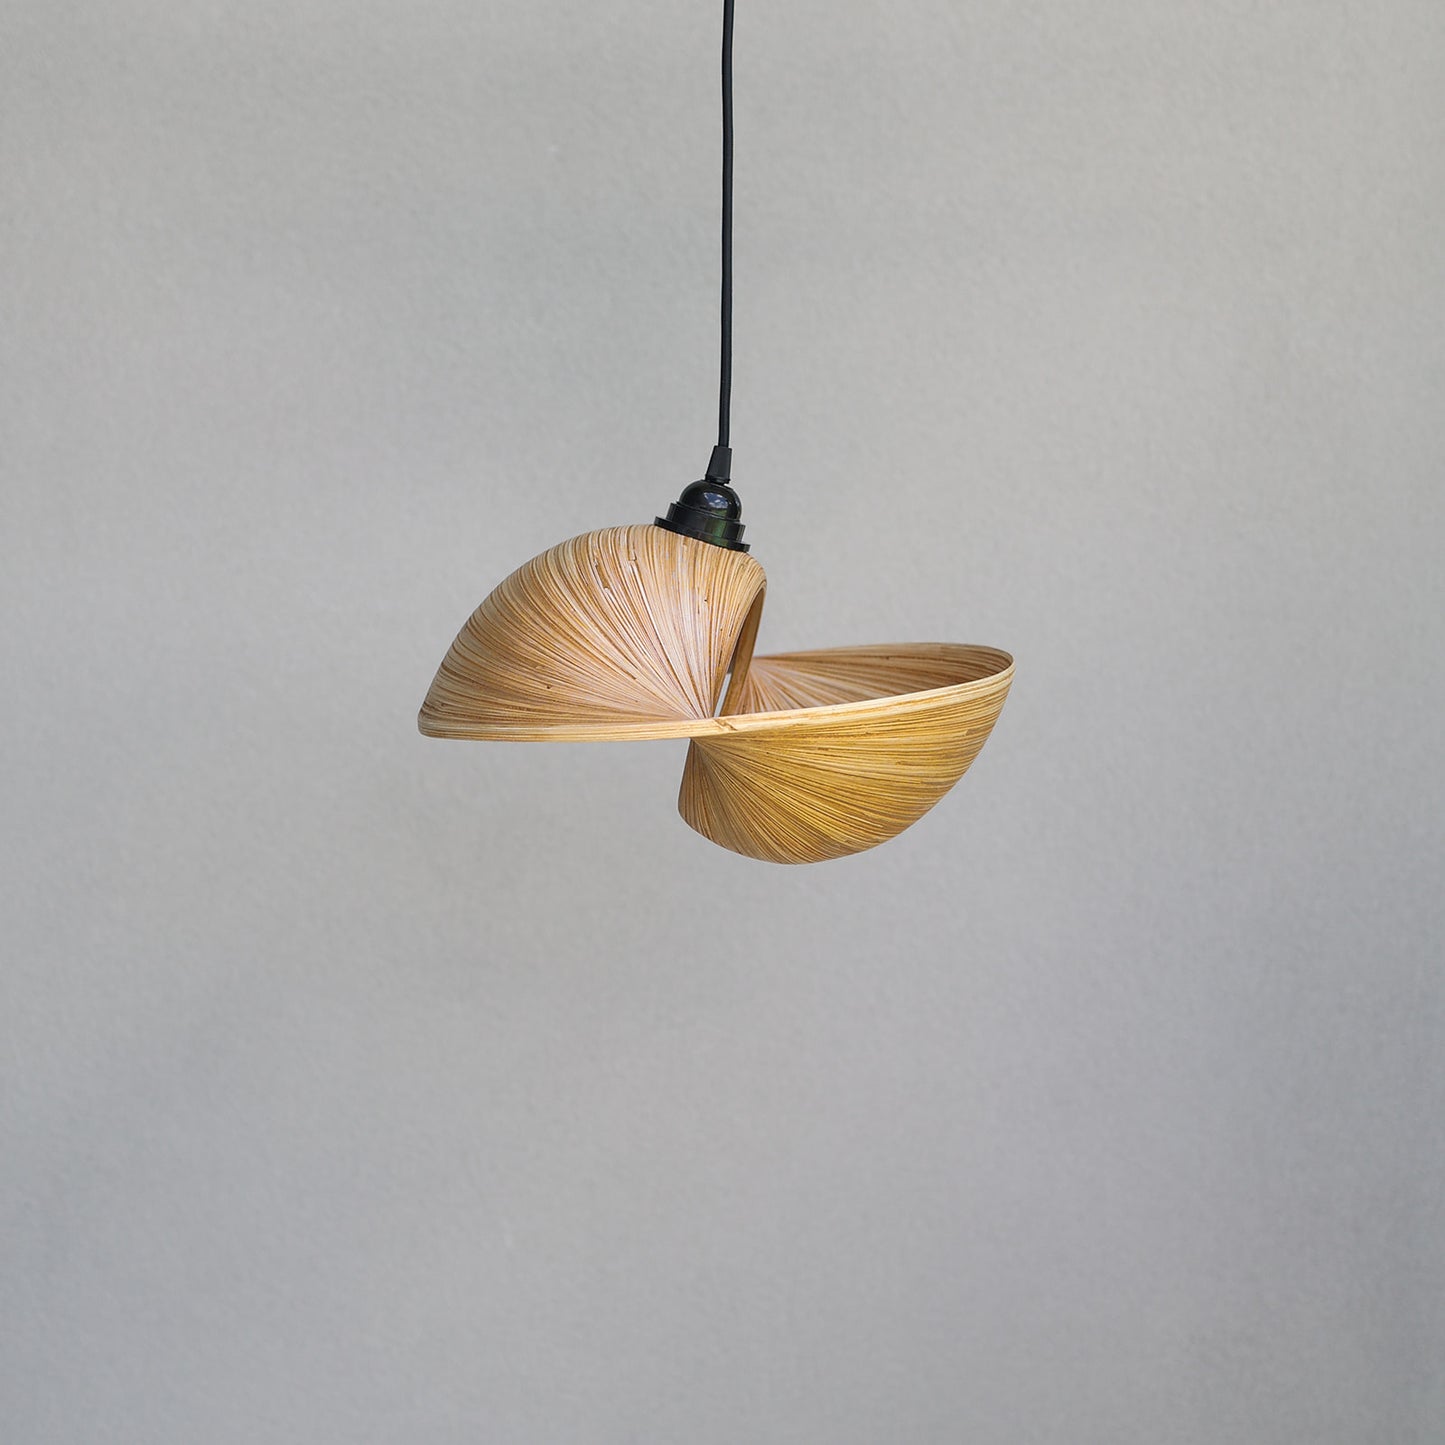 small-bamboo-pendant-light-shade-made-from-thin-strips-of-bamboo-to-look-like-a-shell